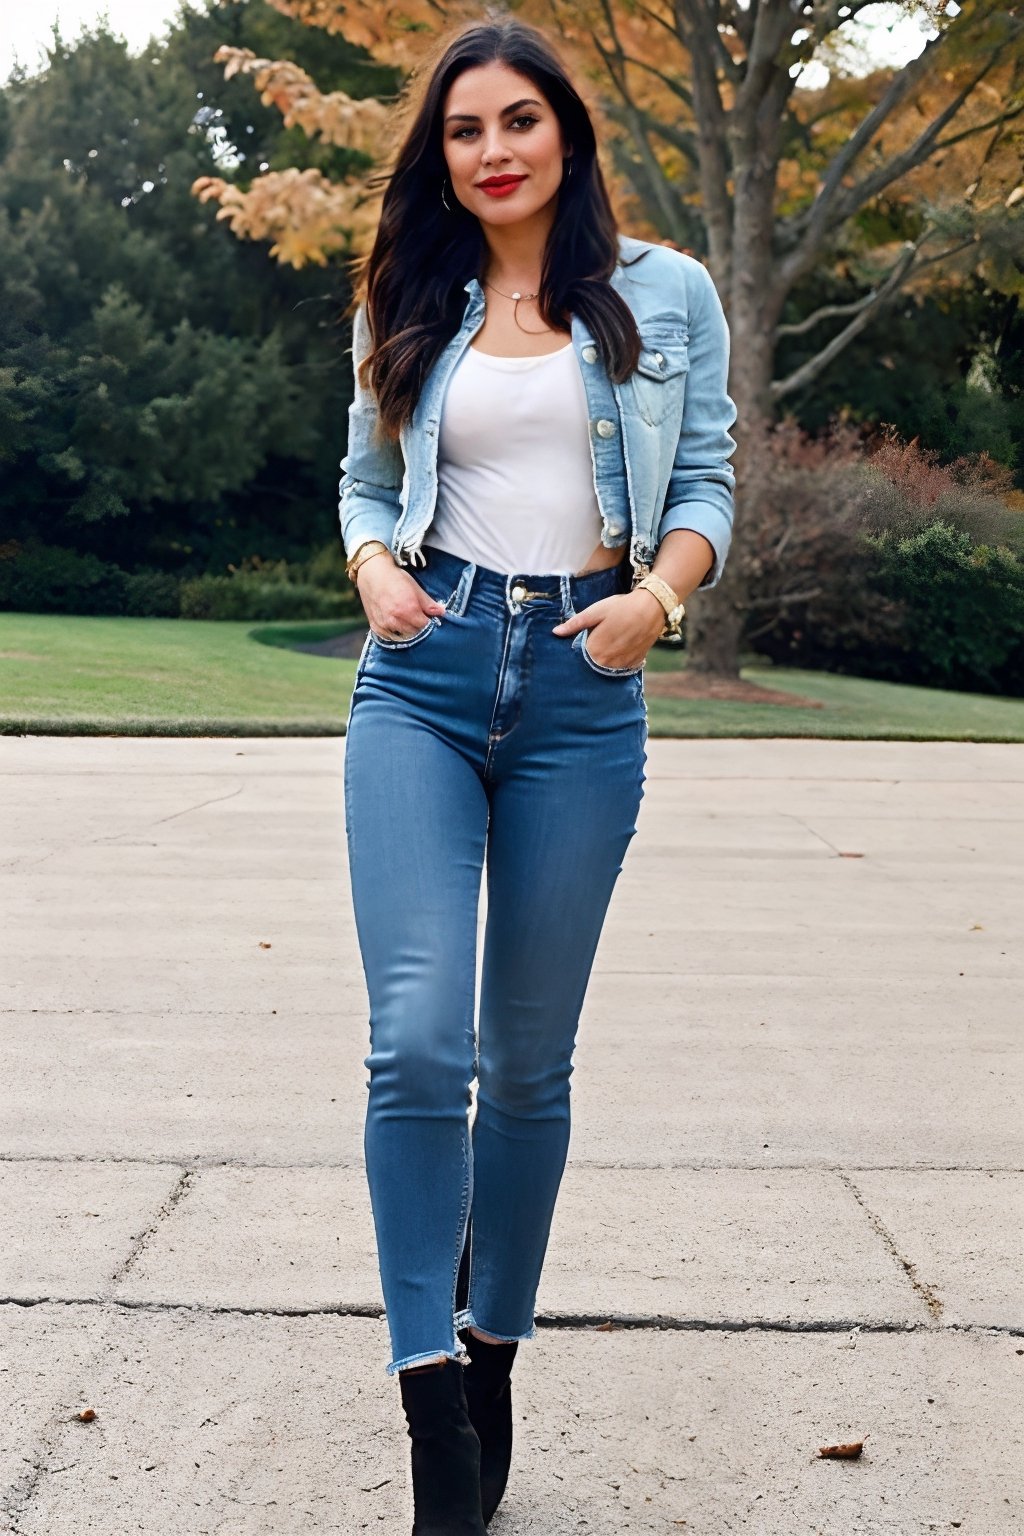 beautiful face, hot red lips, wearing cropped denim jacket and tight levis jeans in light blue color,blackbootsnjeans,Sexy Pose